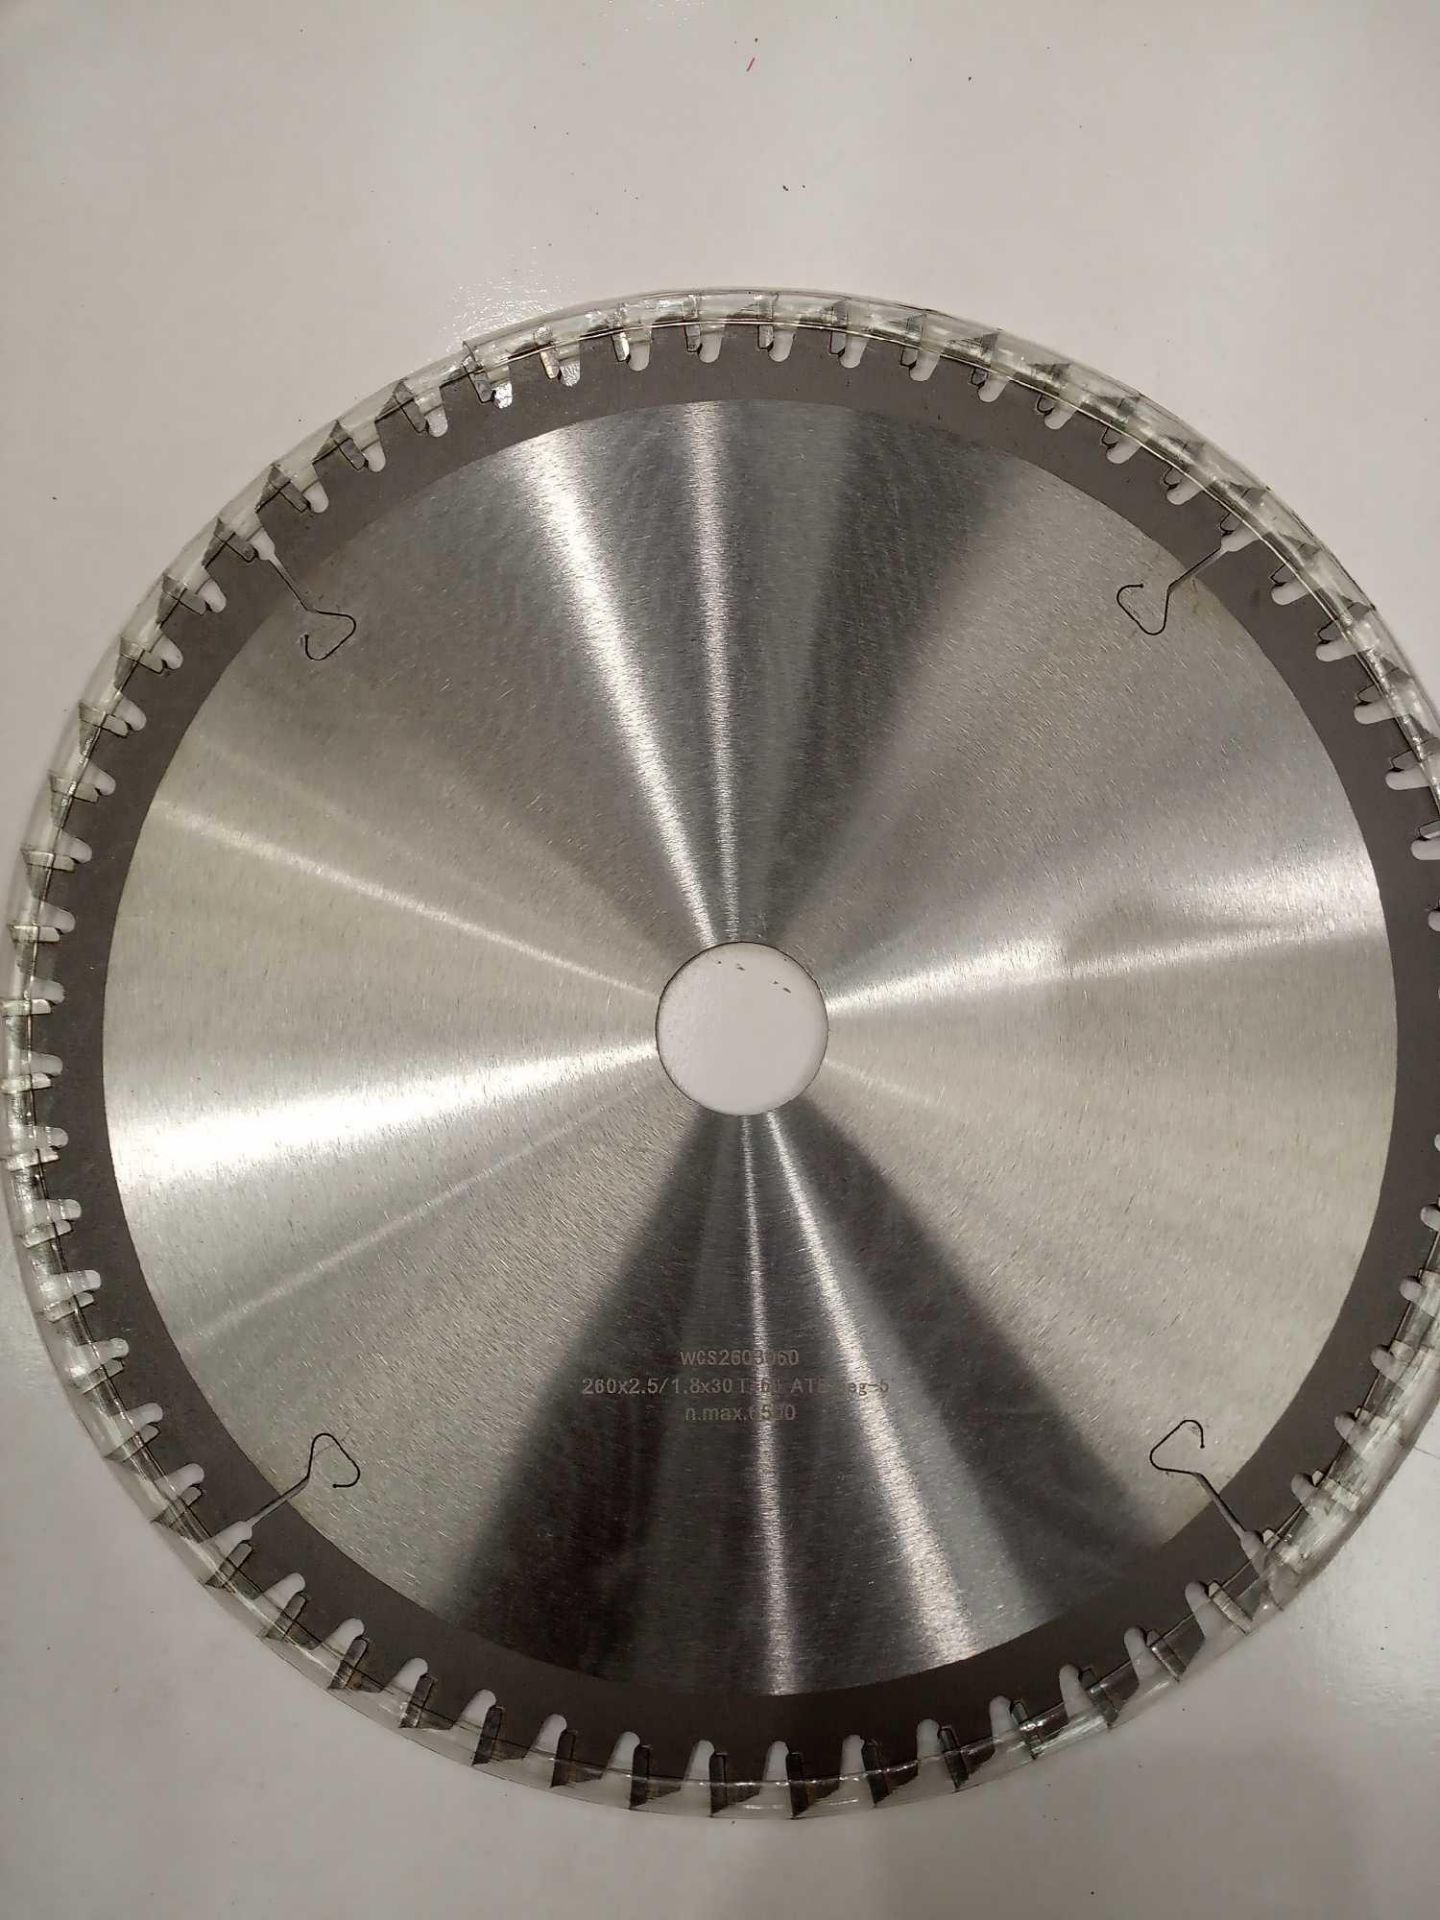 RRP £210 Brand New Wood Cutting Saw Blades - Image 2 of 2